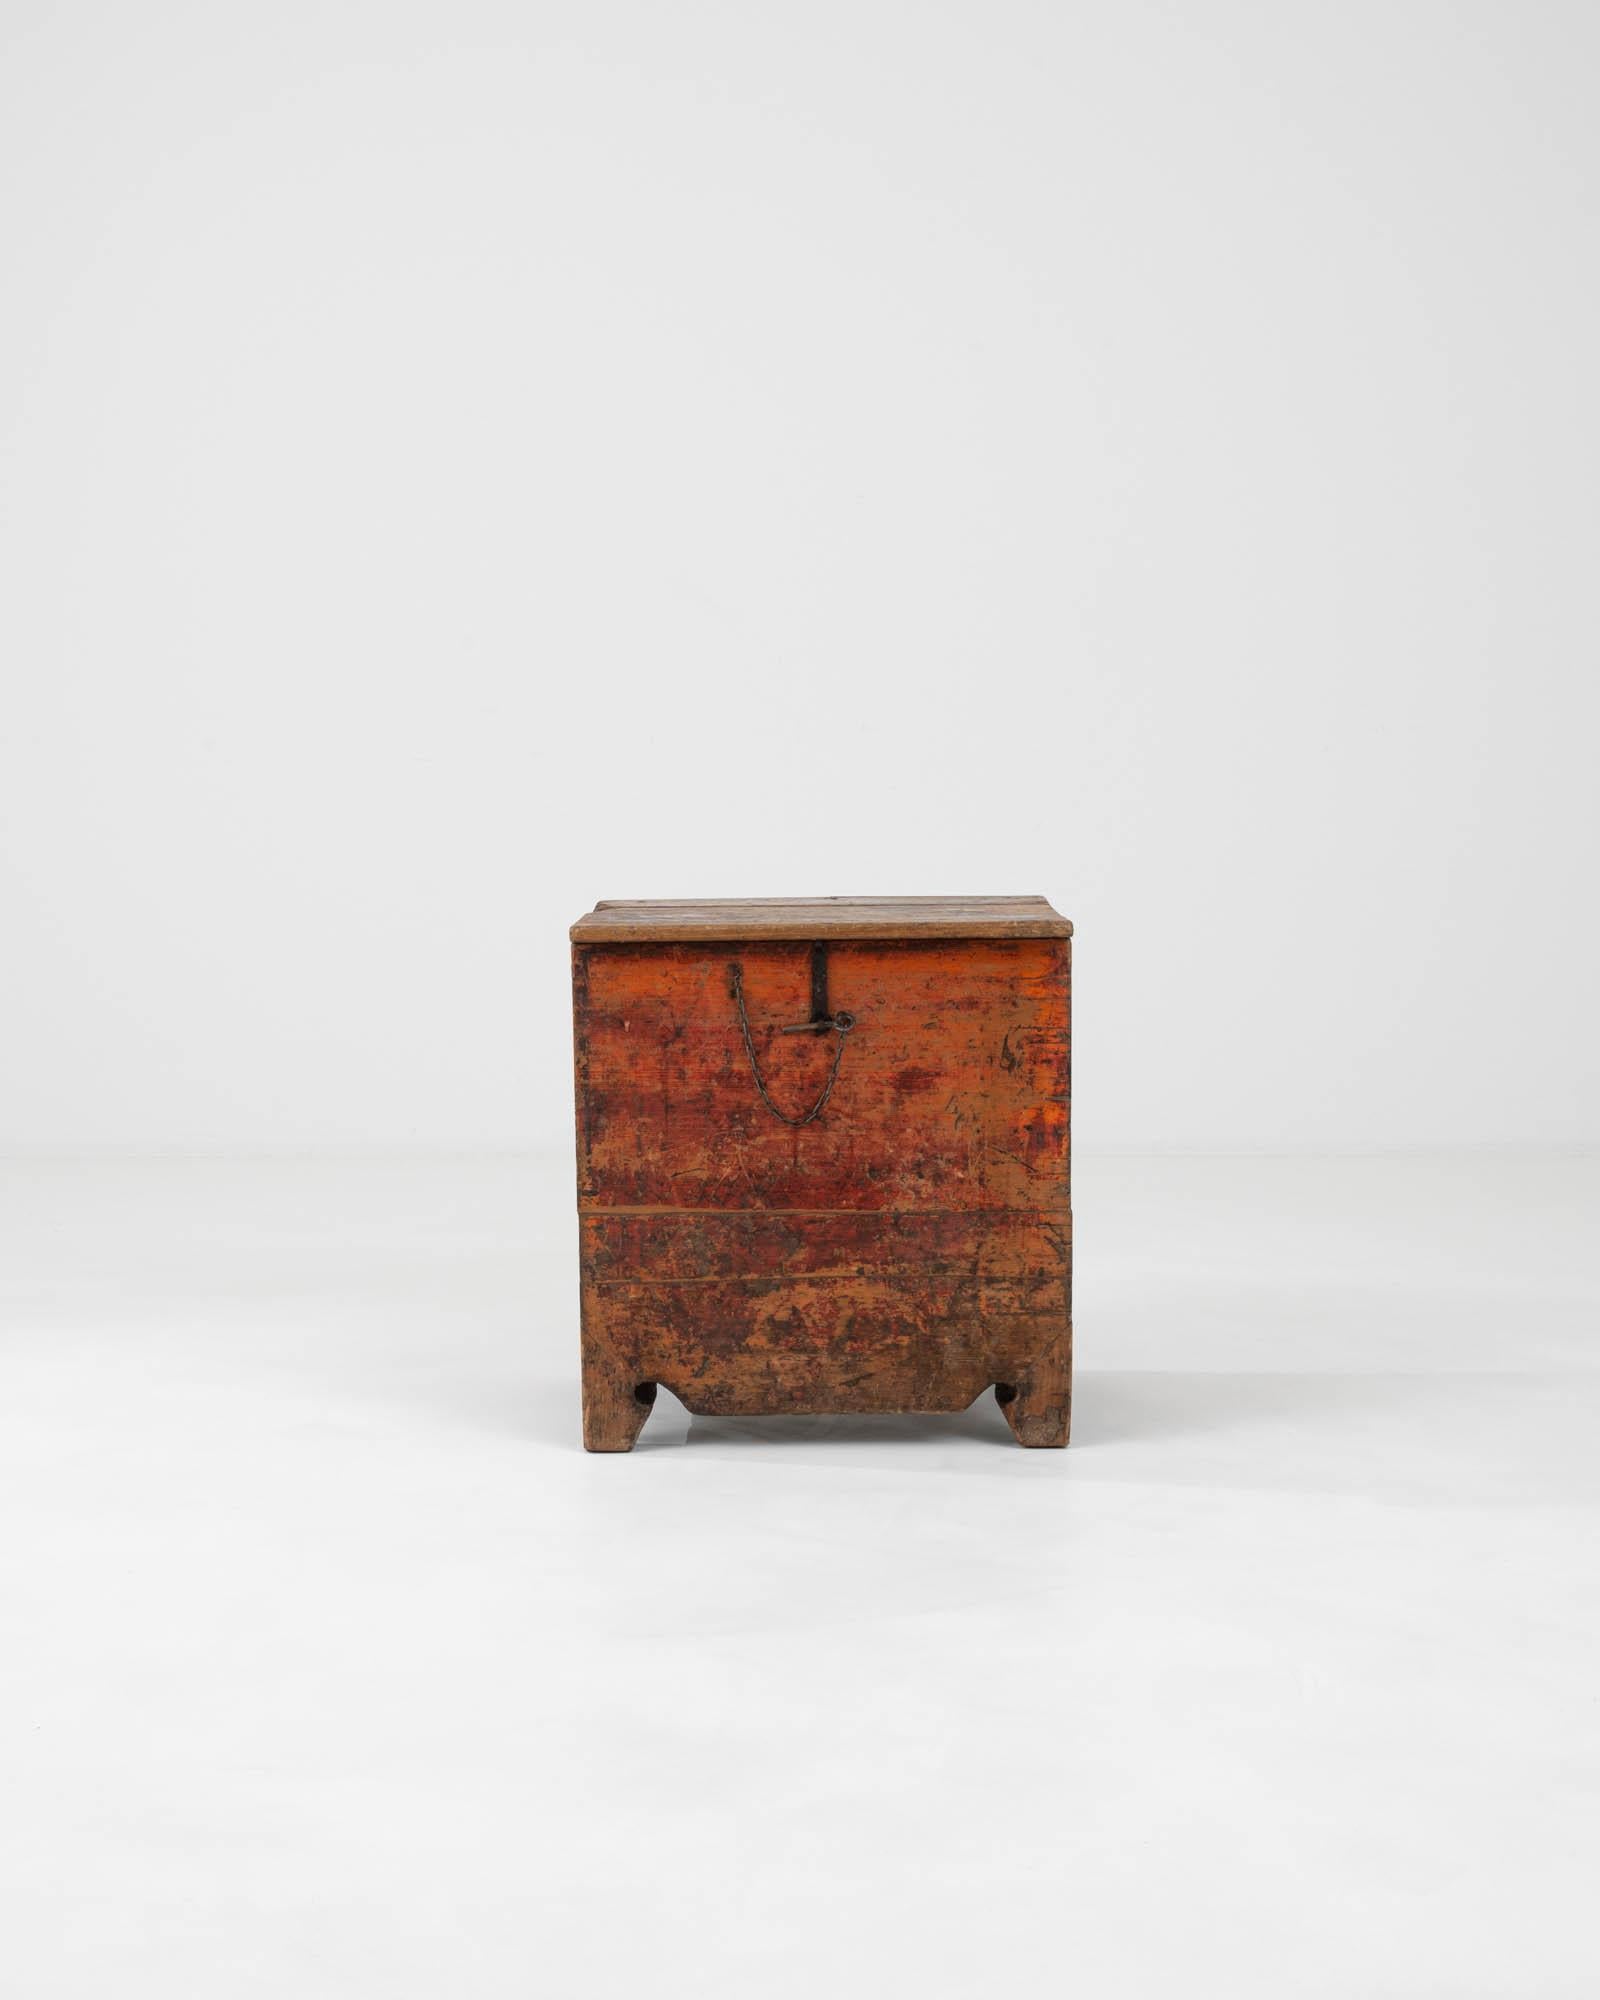 Unearth a treasure of the past with this 19th Century Scandinavian Wooden Chest, a rustic gem steeped in history and character. Crafted from solid wood, this piece showcases the warm, rich tones of its heritage, complemented by the unique patina